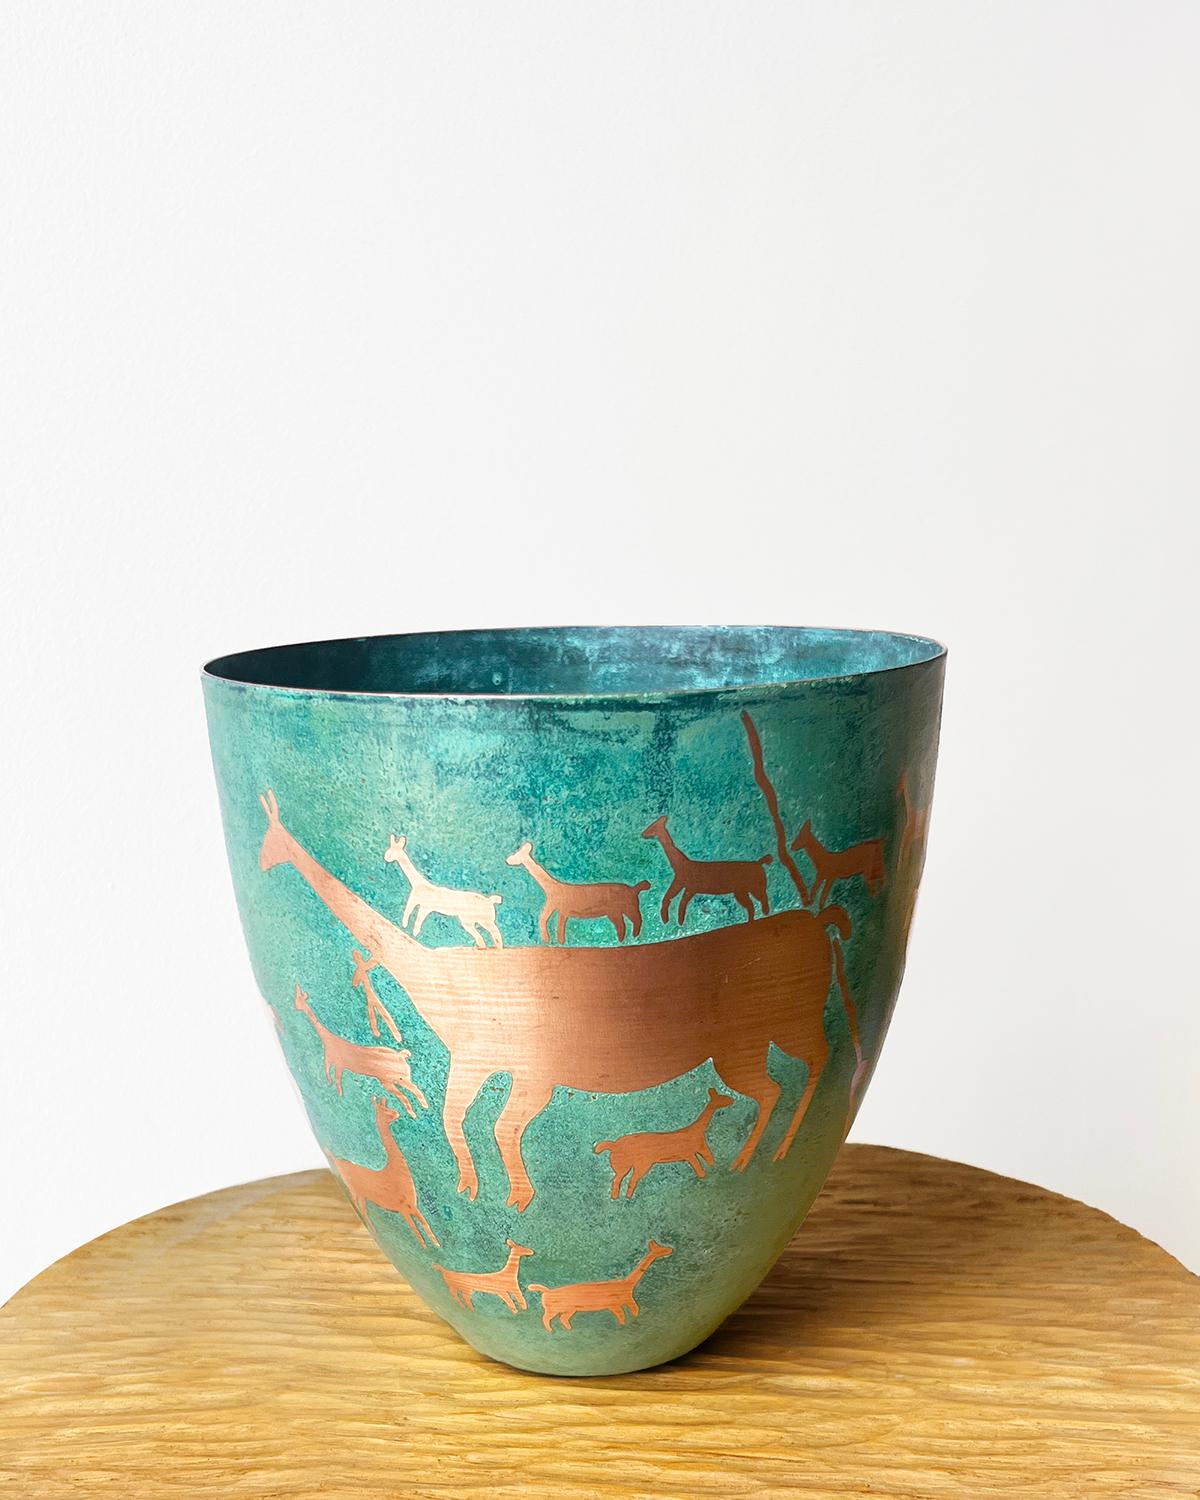 An etched copper vessel with green patina
This Llama Caravan Etched Copper Vessel is a wonderfully unique home accent. The intricate etching of llamas on its copper surface is enhanced with a verdigris green patina. The style is reminiscent of